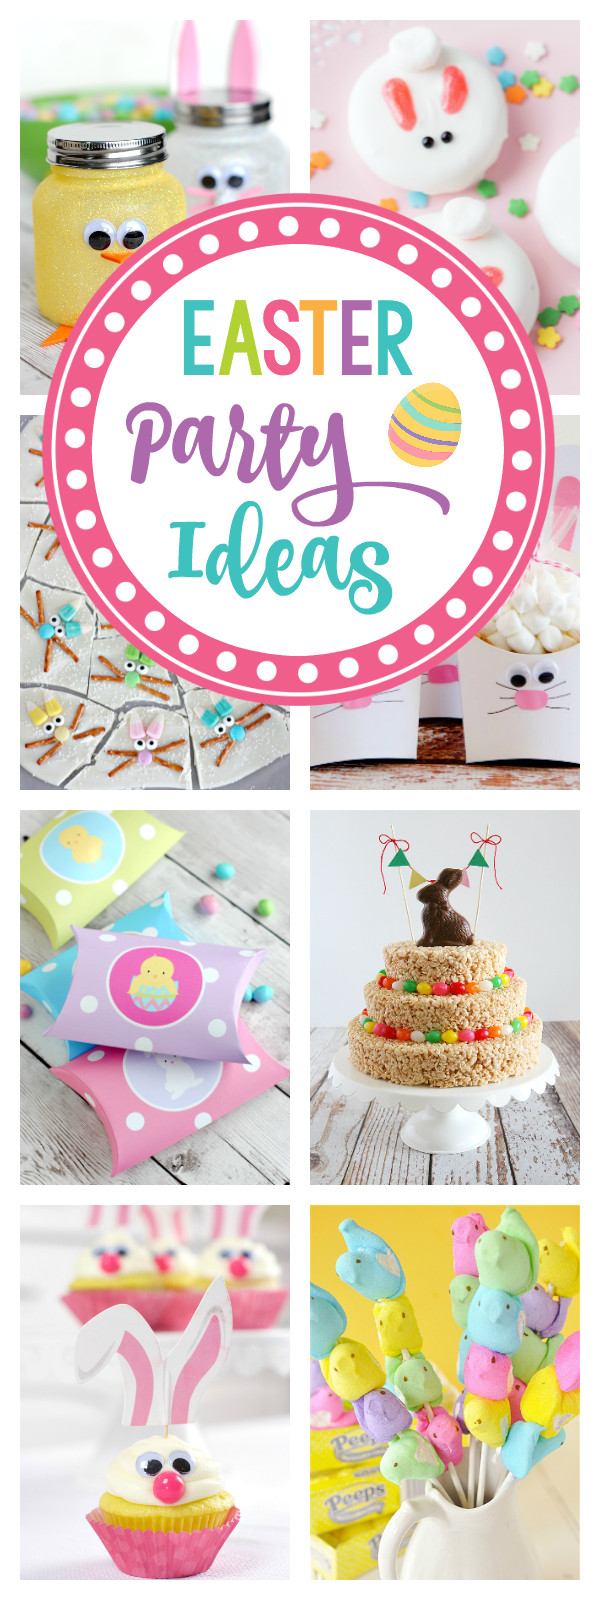 Easter Party Ideas Pinterest
 25 Fun Easter Party Ideas for Kids – Fun Squared